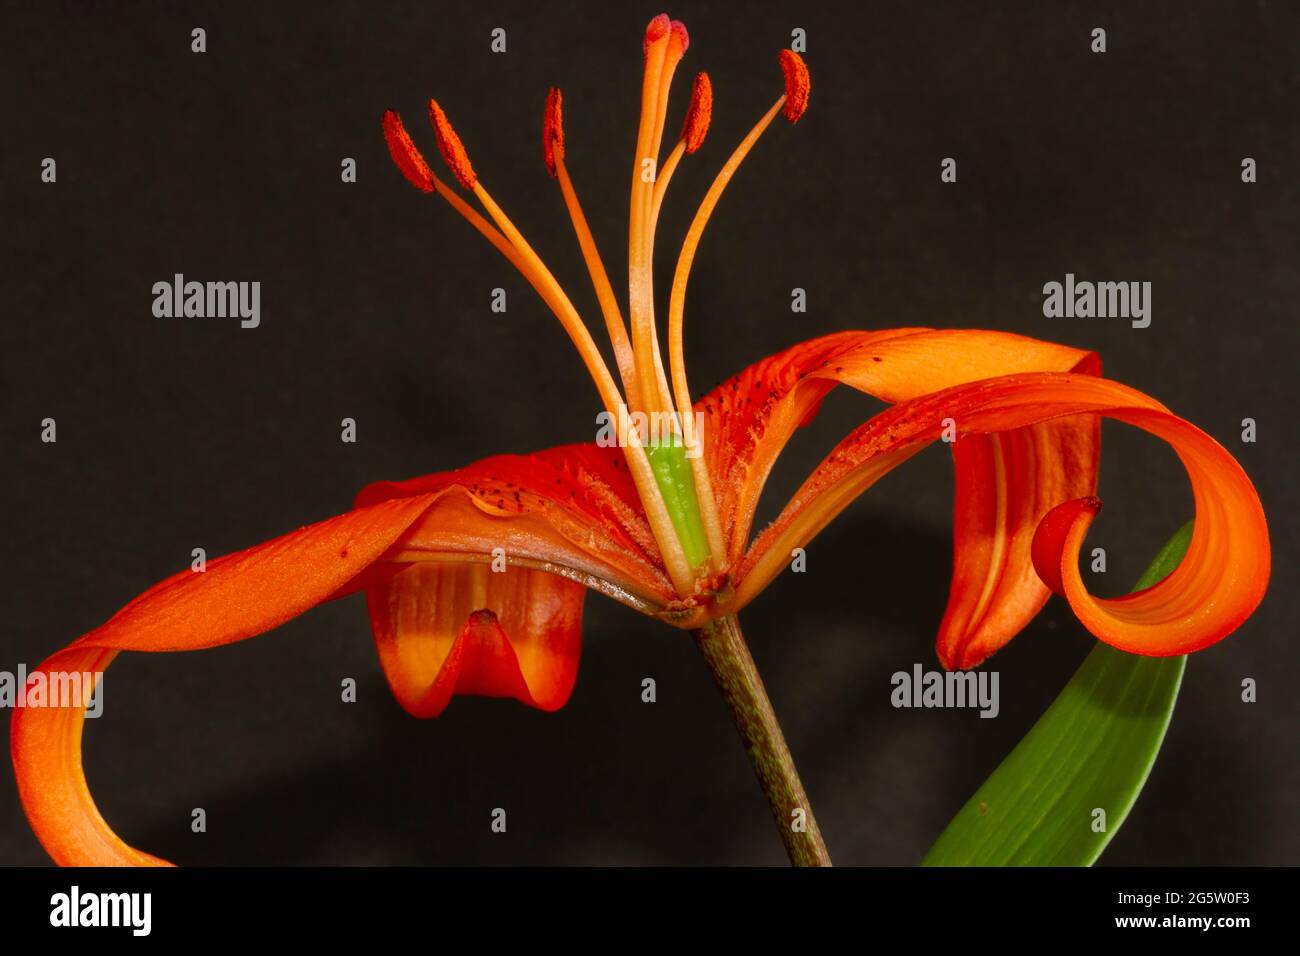 The details of the reproductive parts of a Lily flower. The pollen bearing anthers(male) on long filaments surround the female stigma Stock Photo